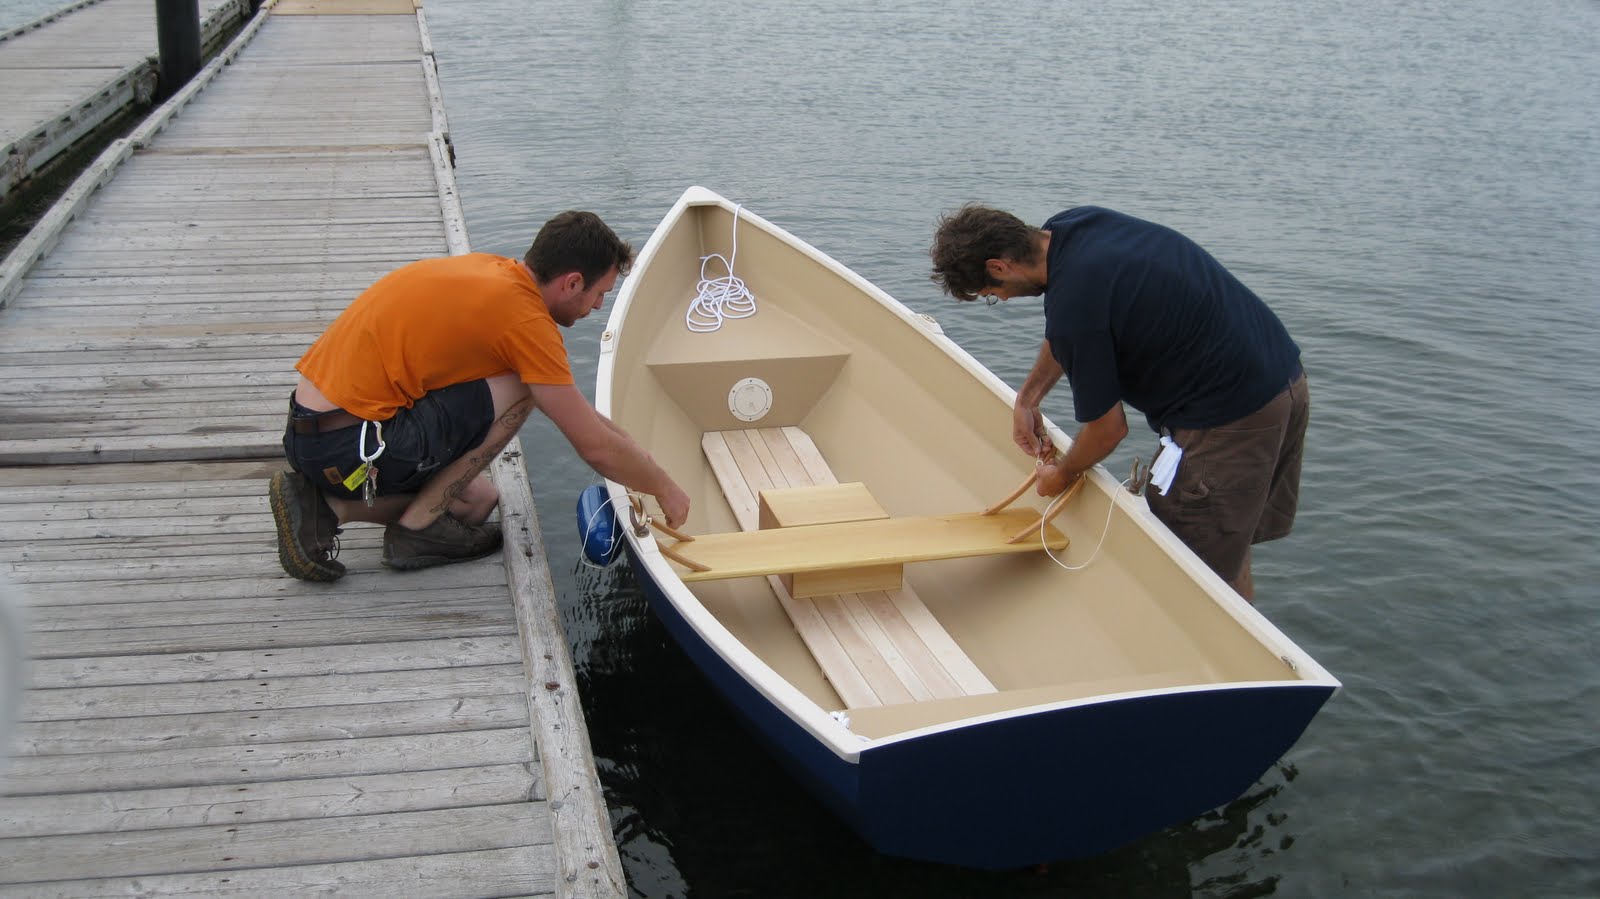 Building, Designing, and Using Small Boats on the Coast of ...